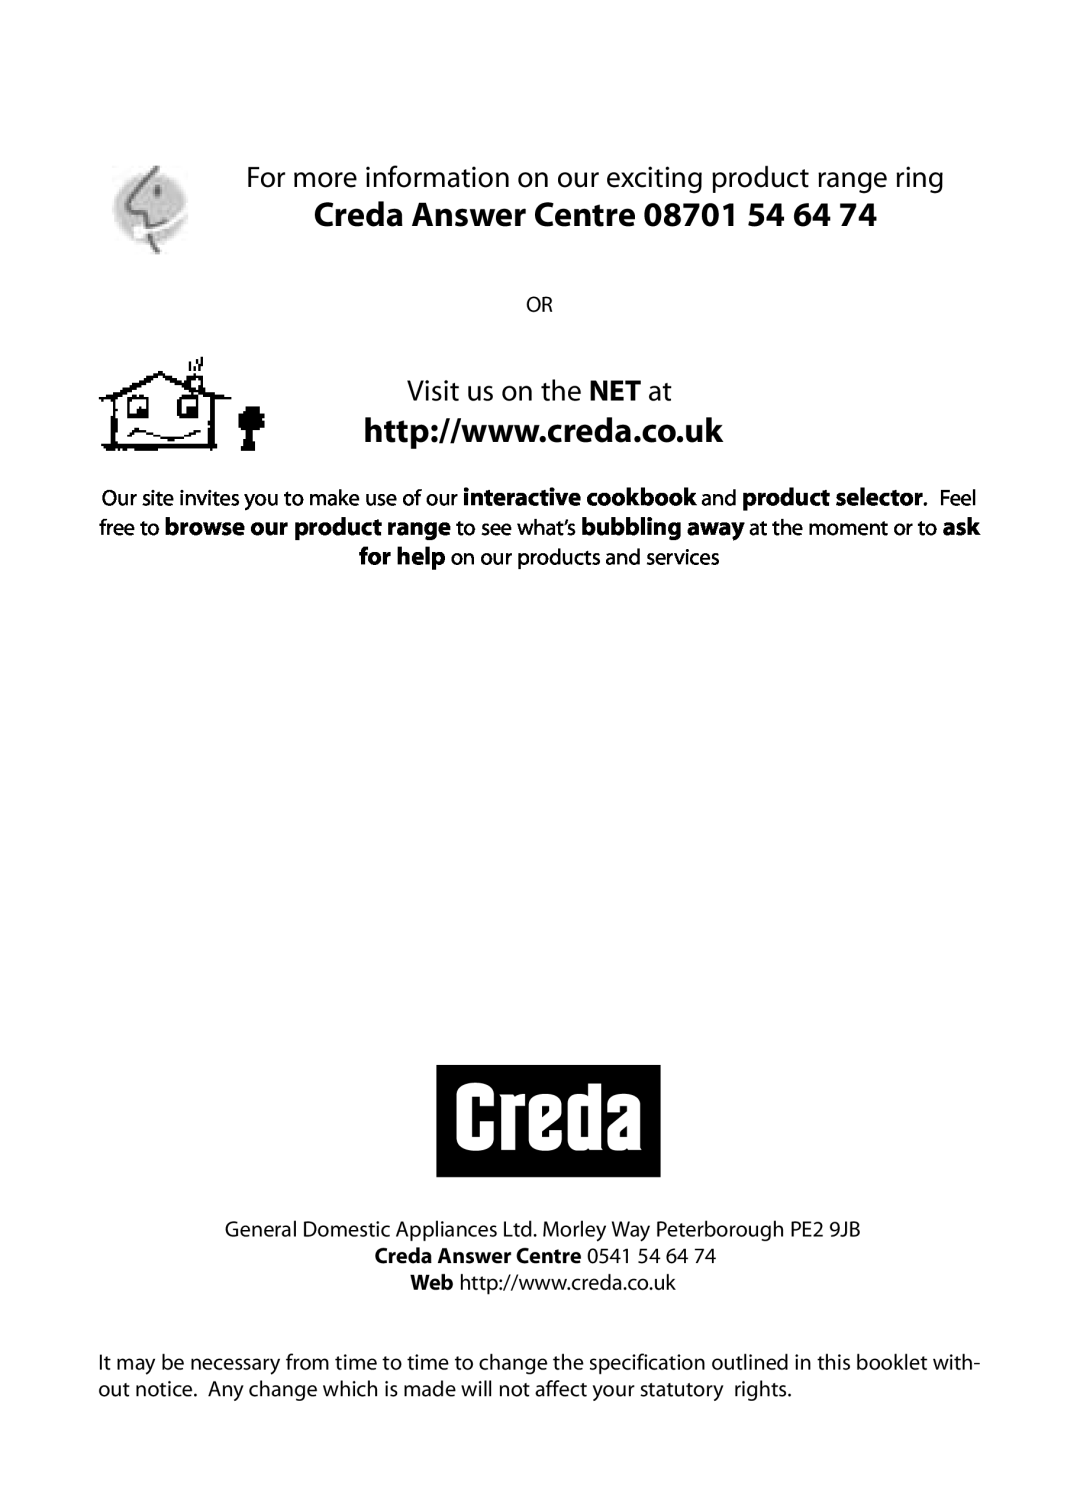 Creda S220E manual Creda Answer Centre 08701 54 64, For more information on our exciting product range ring 